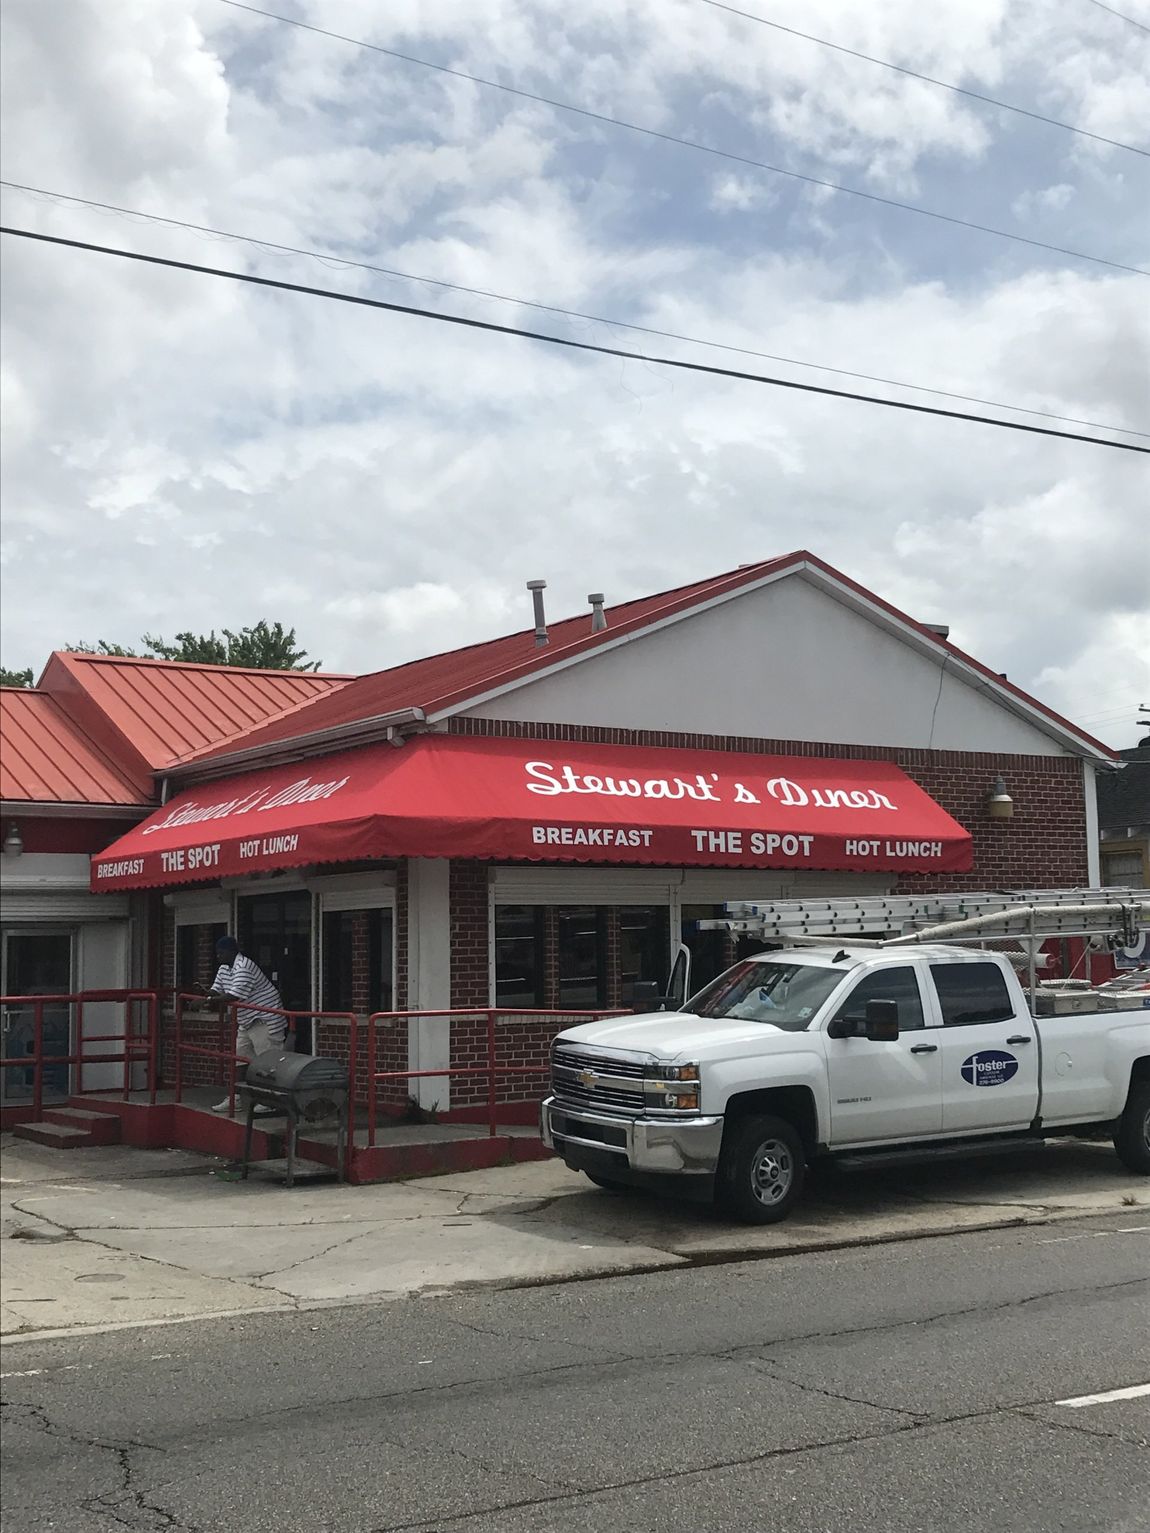 Foster Custom Awnings Gallery — Awnings Installed On A Restaurant in Chalmette, LA